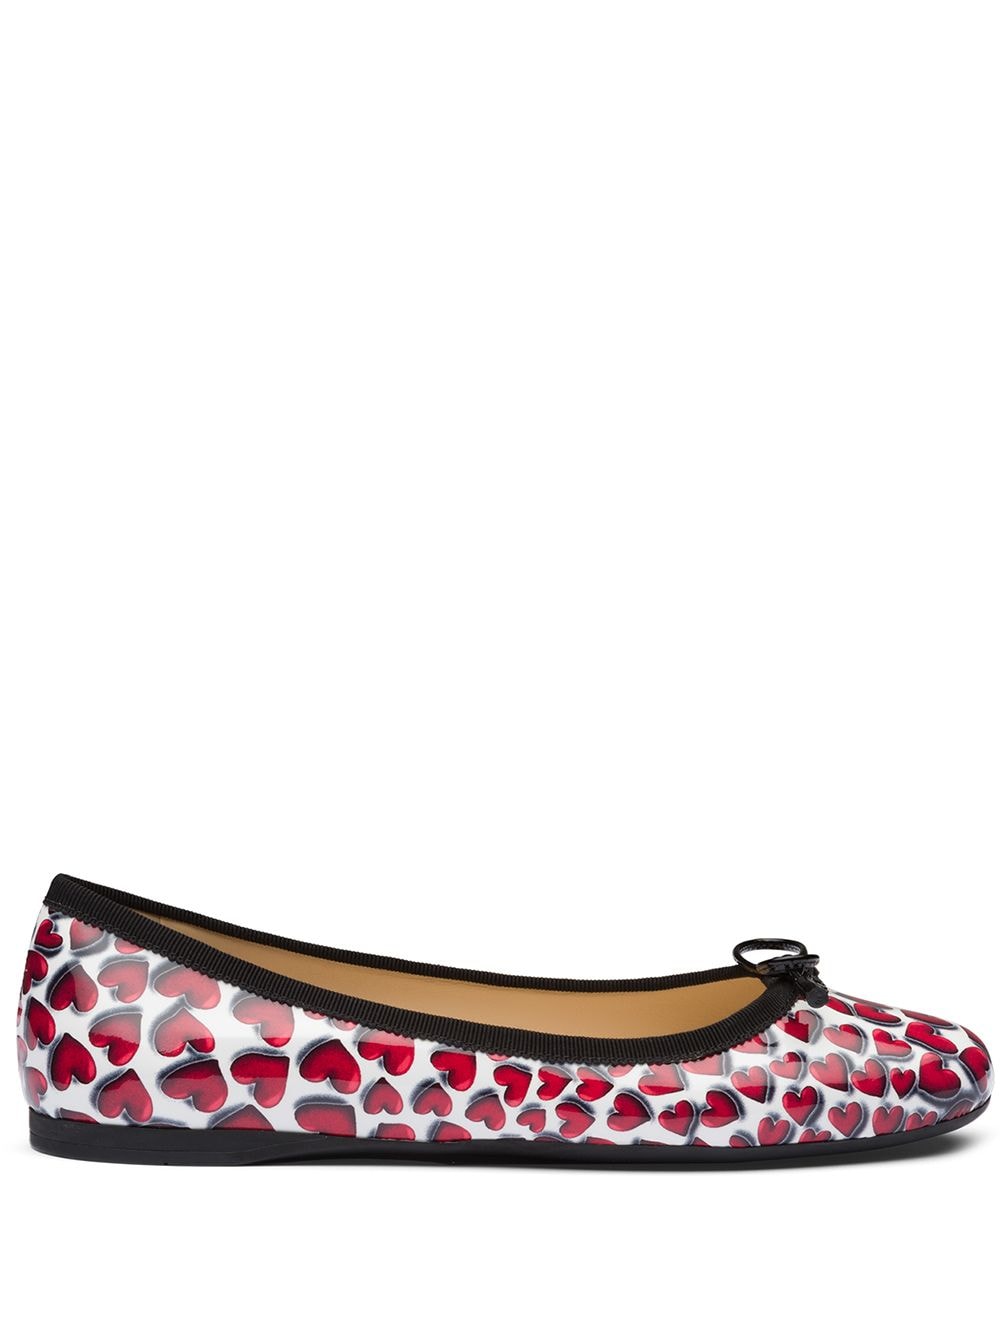 Prada Printed Patent Leather Ballerina Shoes In Red